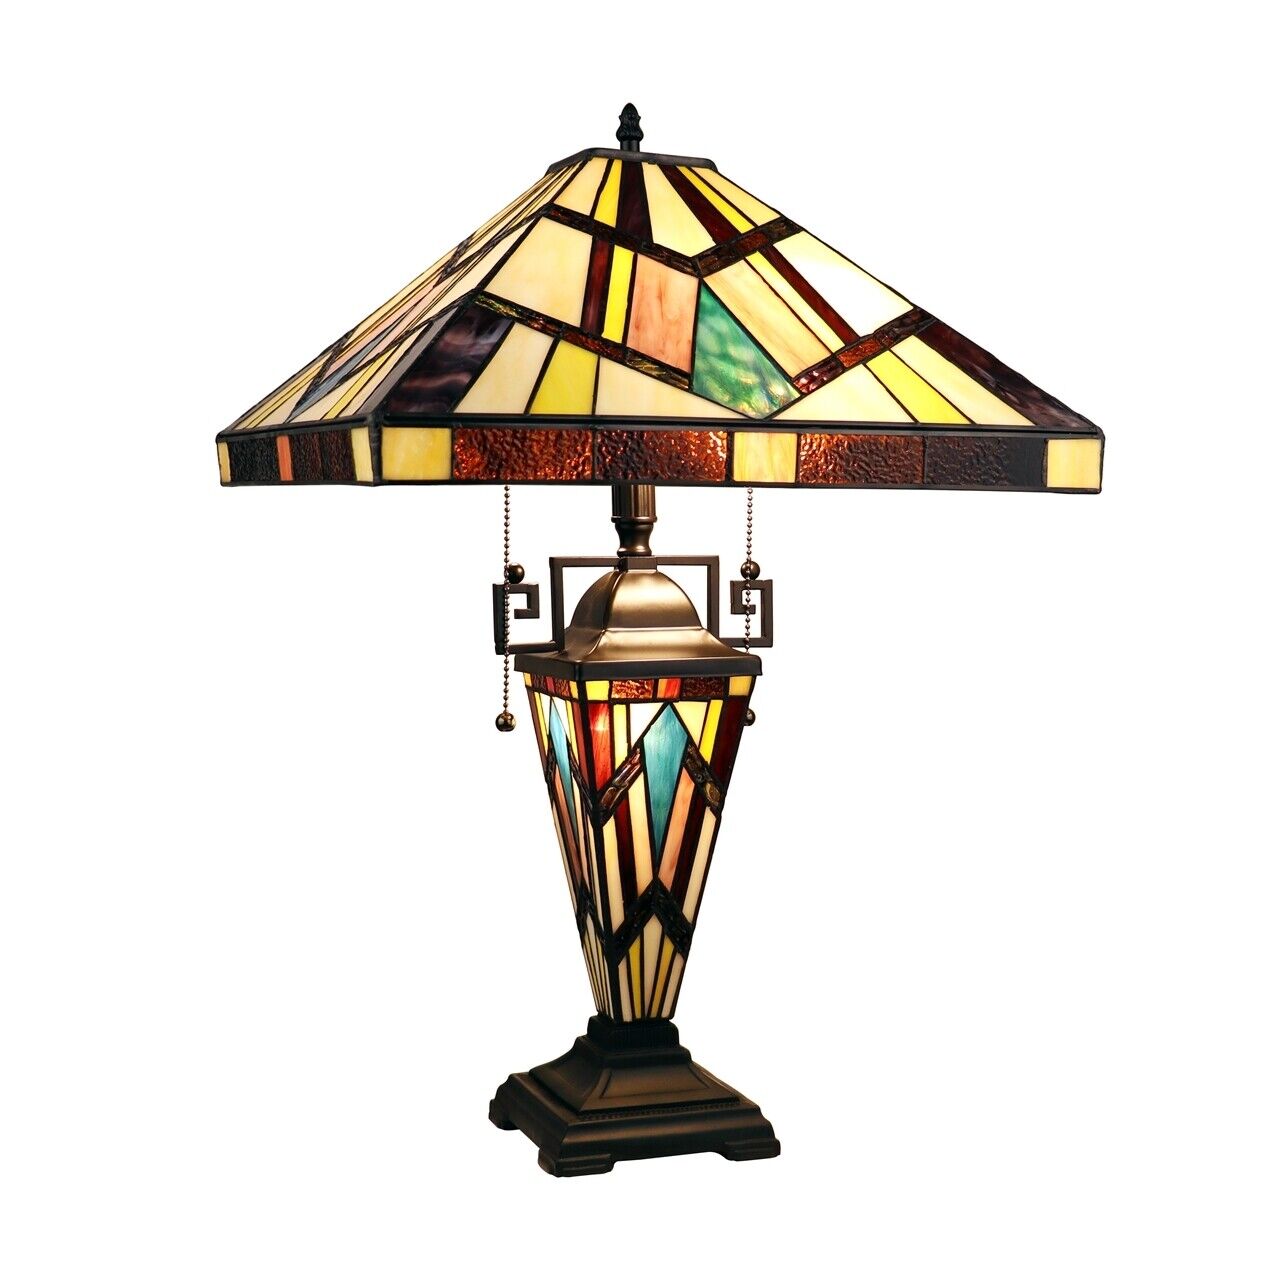 24" 3 light Antique Vintage Style Stained Glass Mission Table Lamp